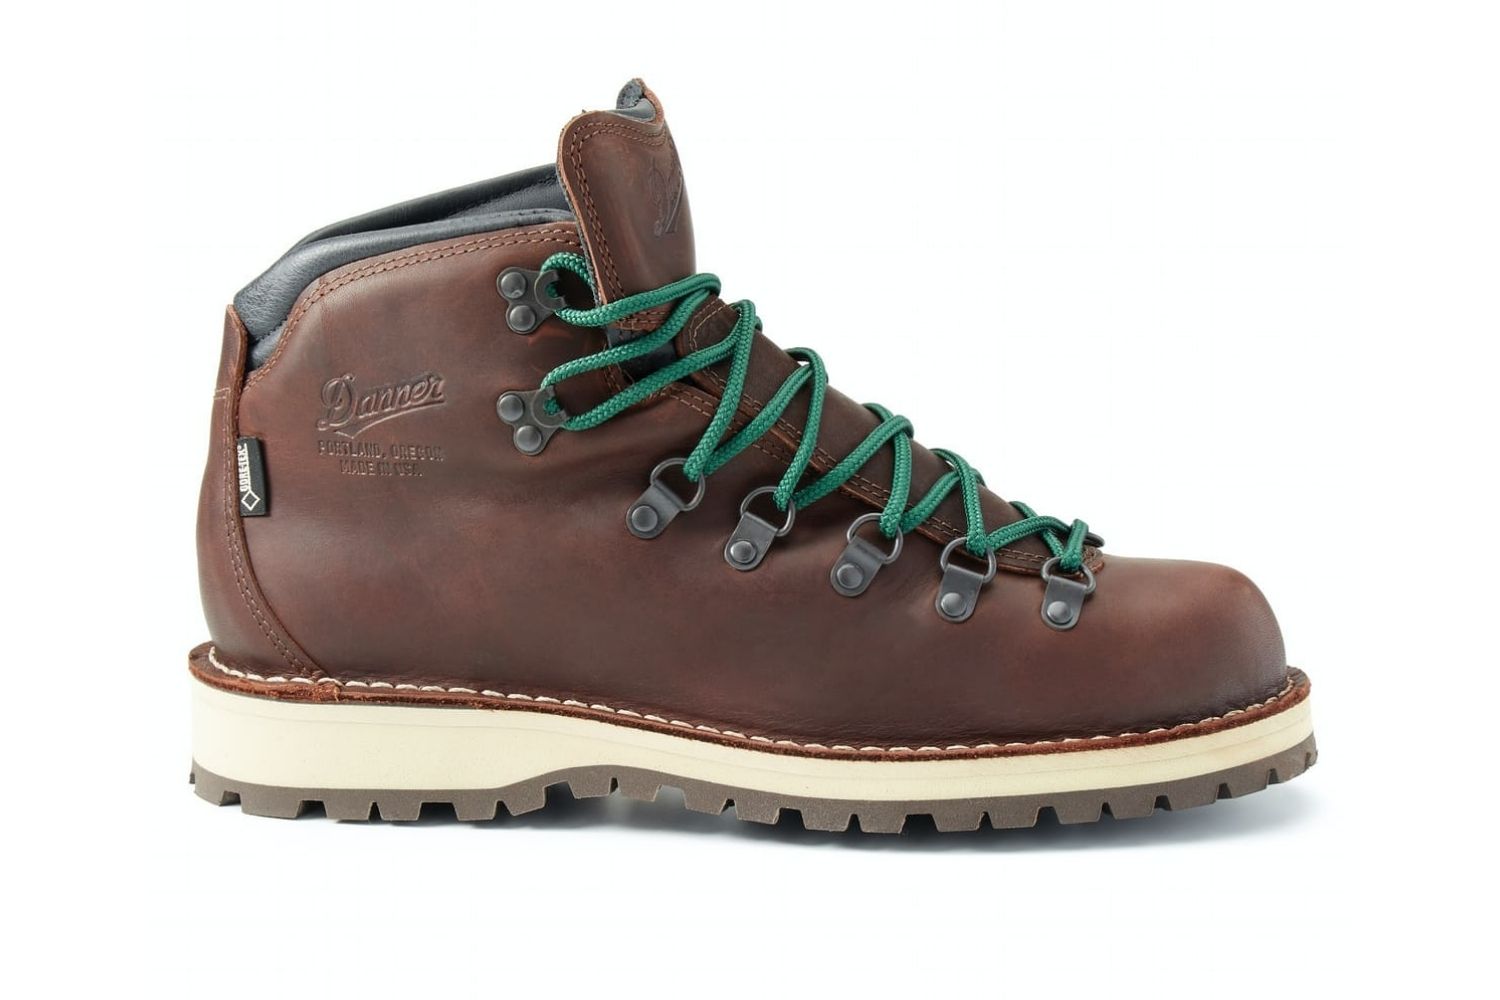 The Best Men's Hiking Boots That Money Can Buy